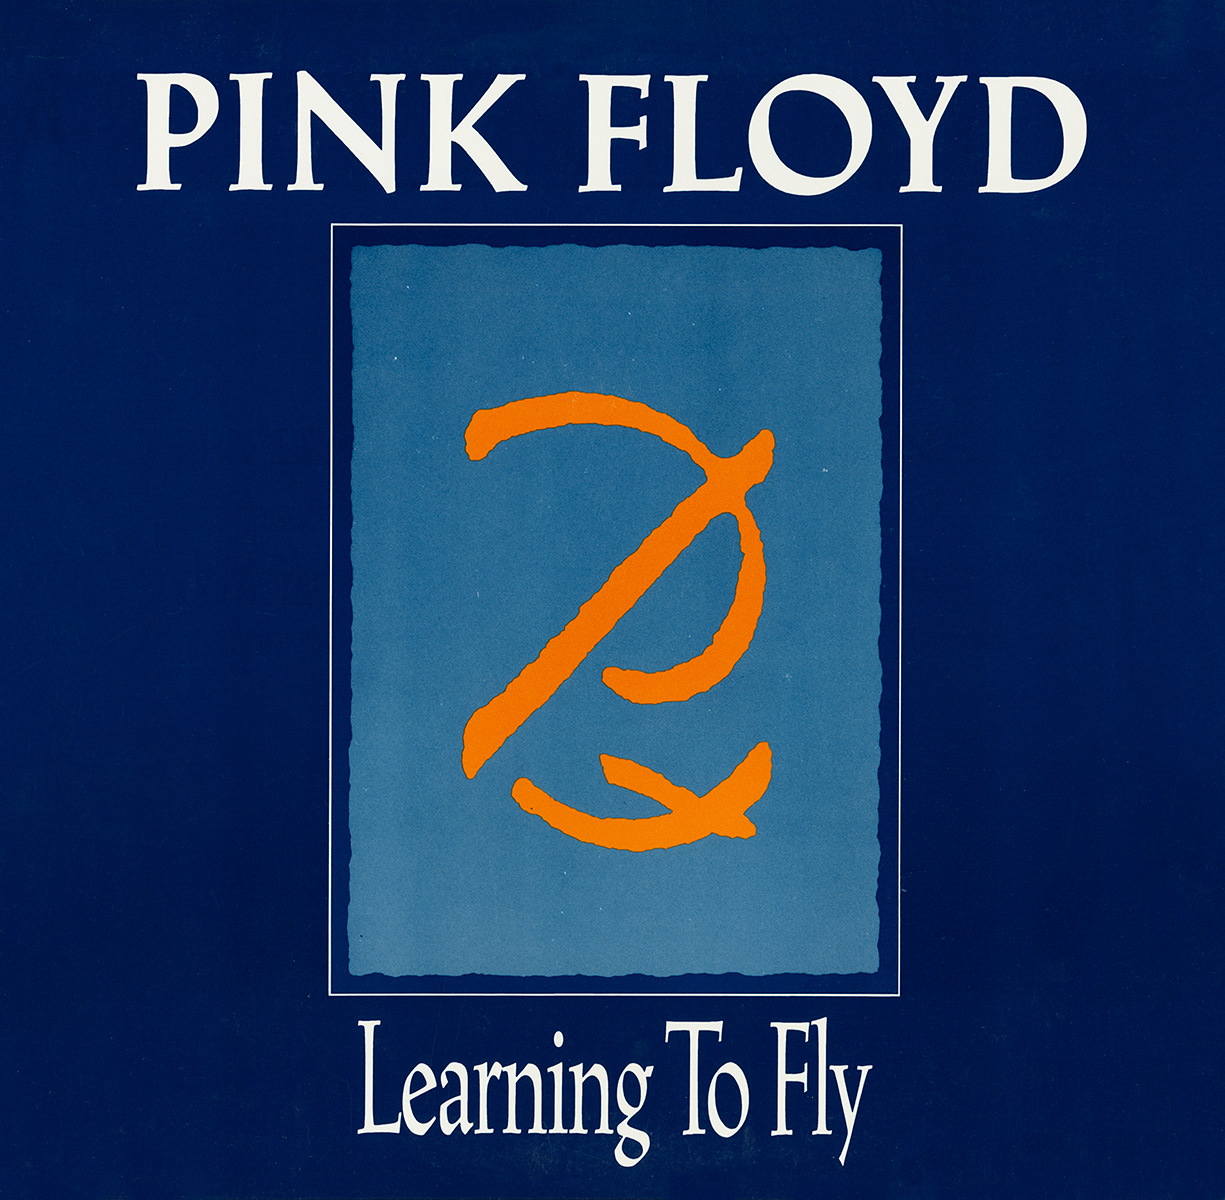 Pink Floyd Archives-U.S. Pink Floyd EP Discography